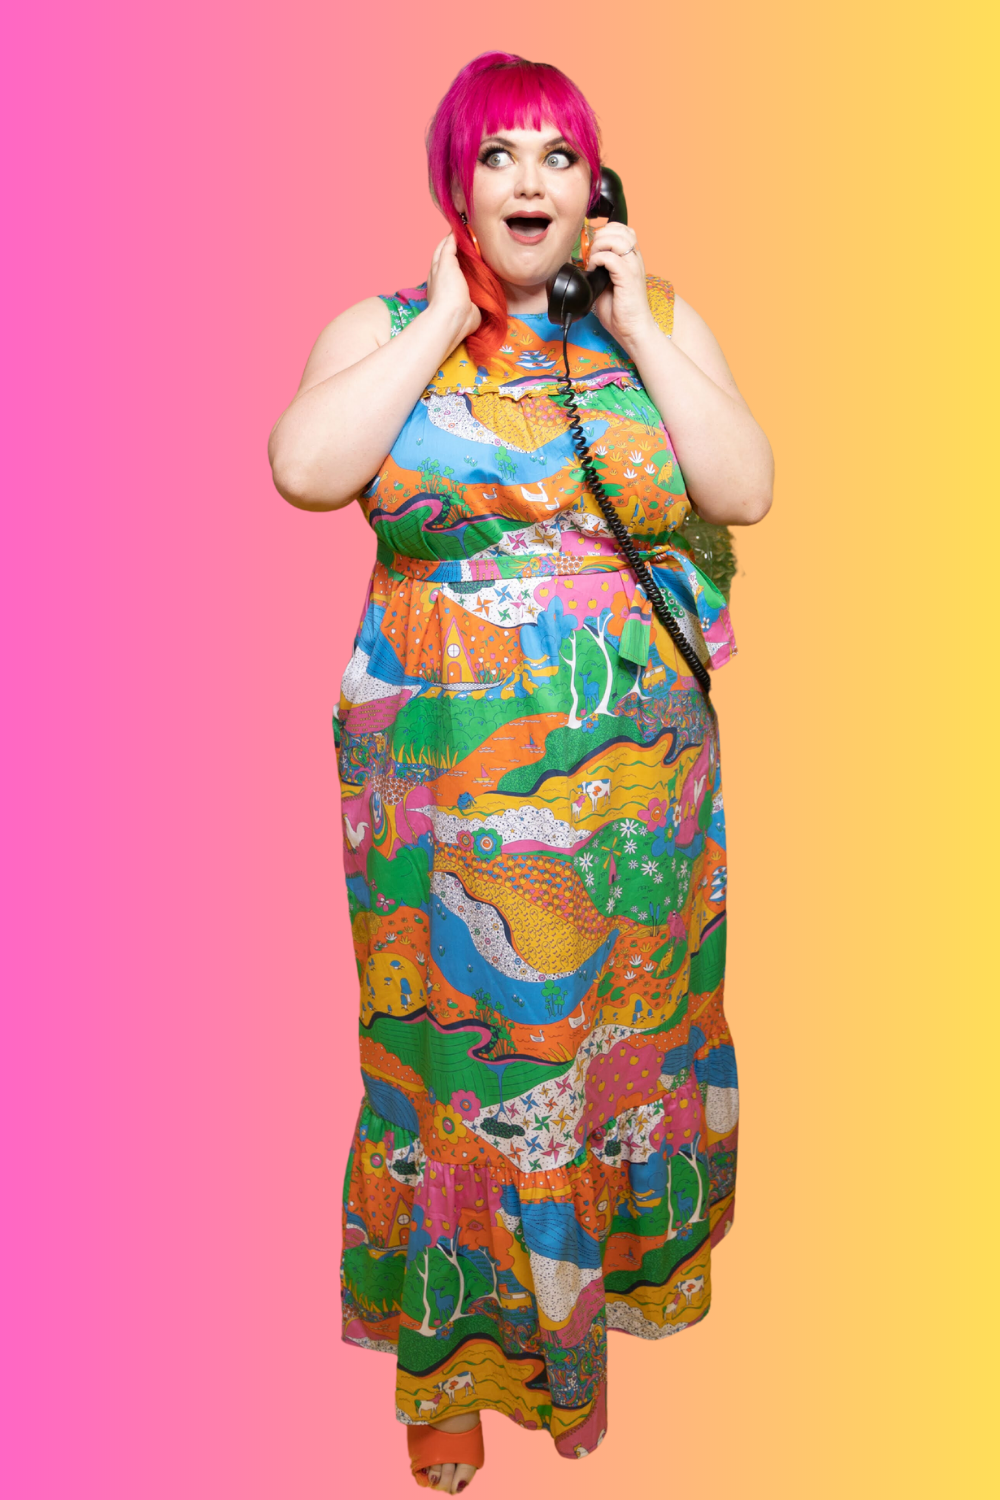 Radiant pink haired model wearing rainbow colored psychedelic maxidress, talking on phone with colorful background